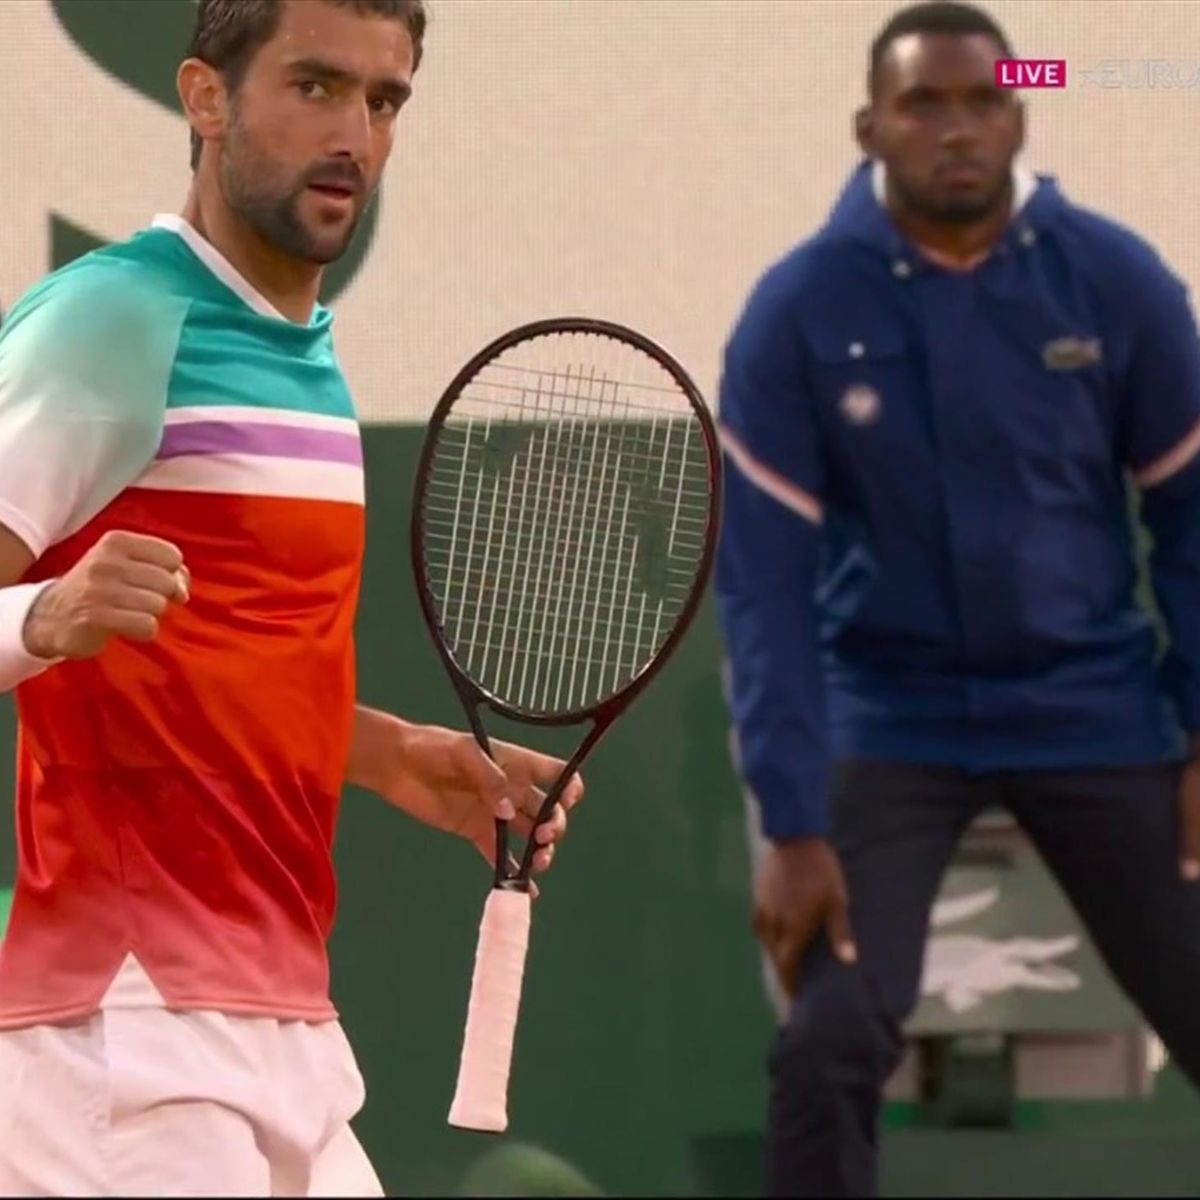 French Open 2022 Too good! - Marin Cilic hits monster forehand against Daniil Medvedev - Tennis video